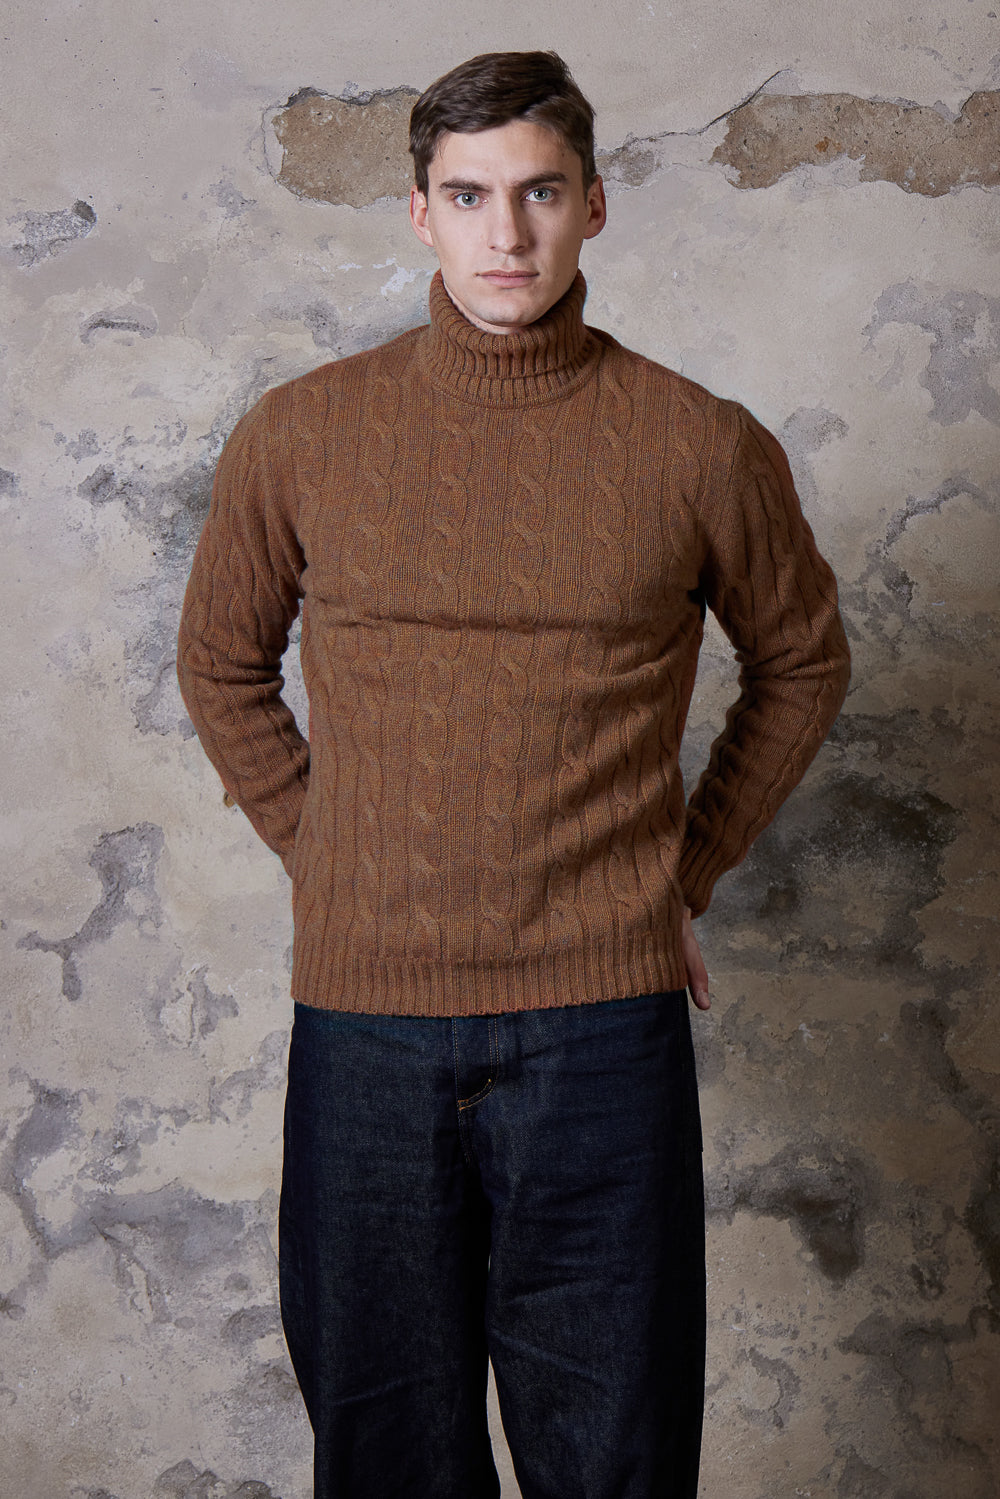 Buy the Daniele Fiesoli Cable Roll Neck Sweatshirt in Brown at Intro. Spend £50 for free UK delivery. Official stockists. We ship worldwide.